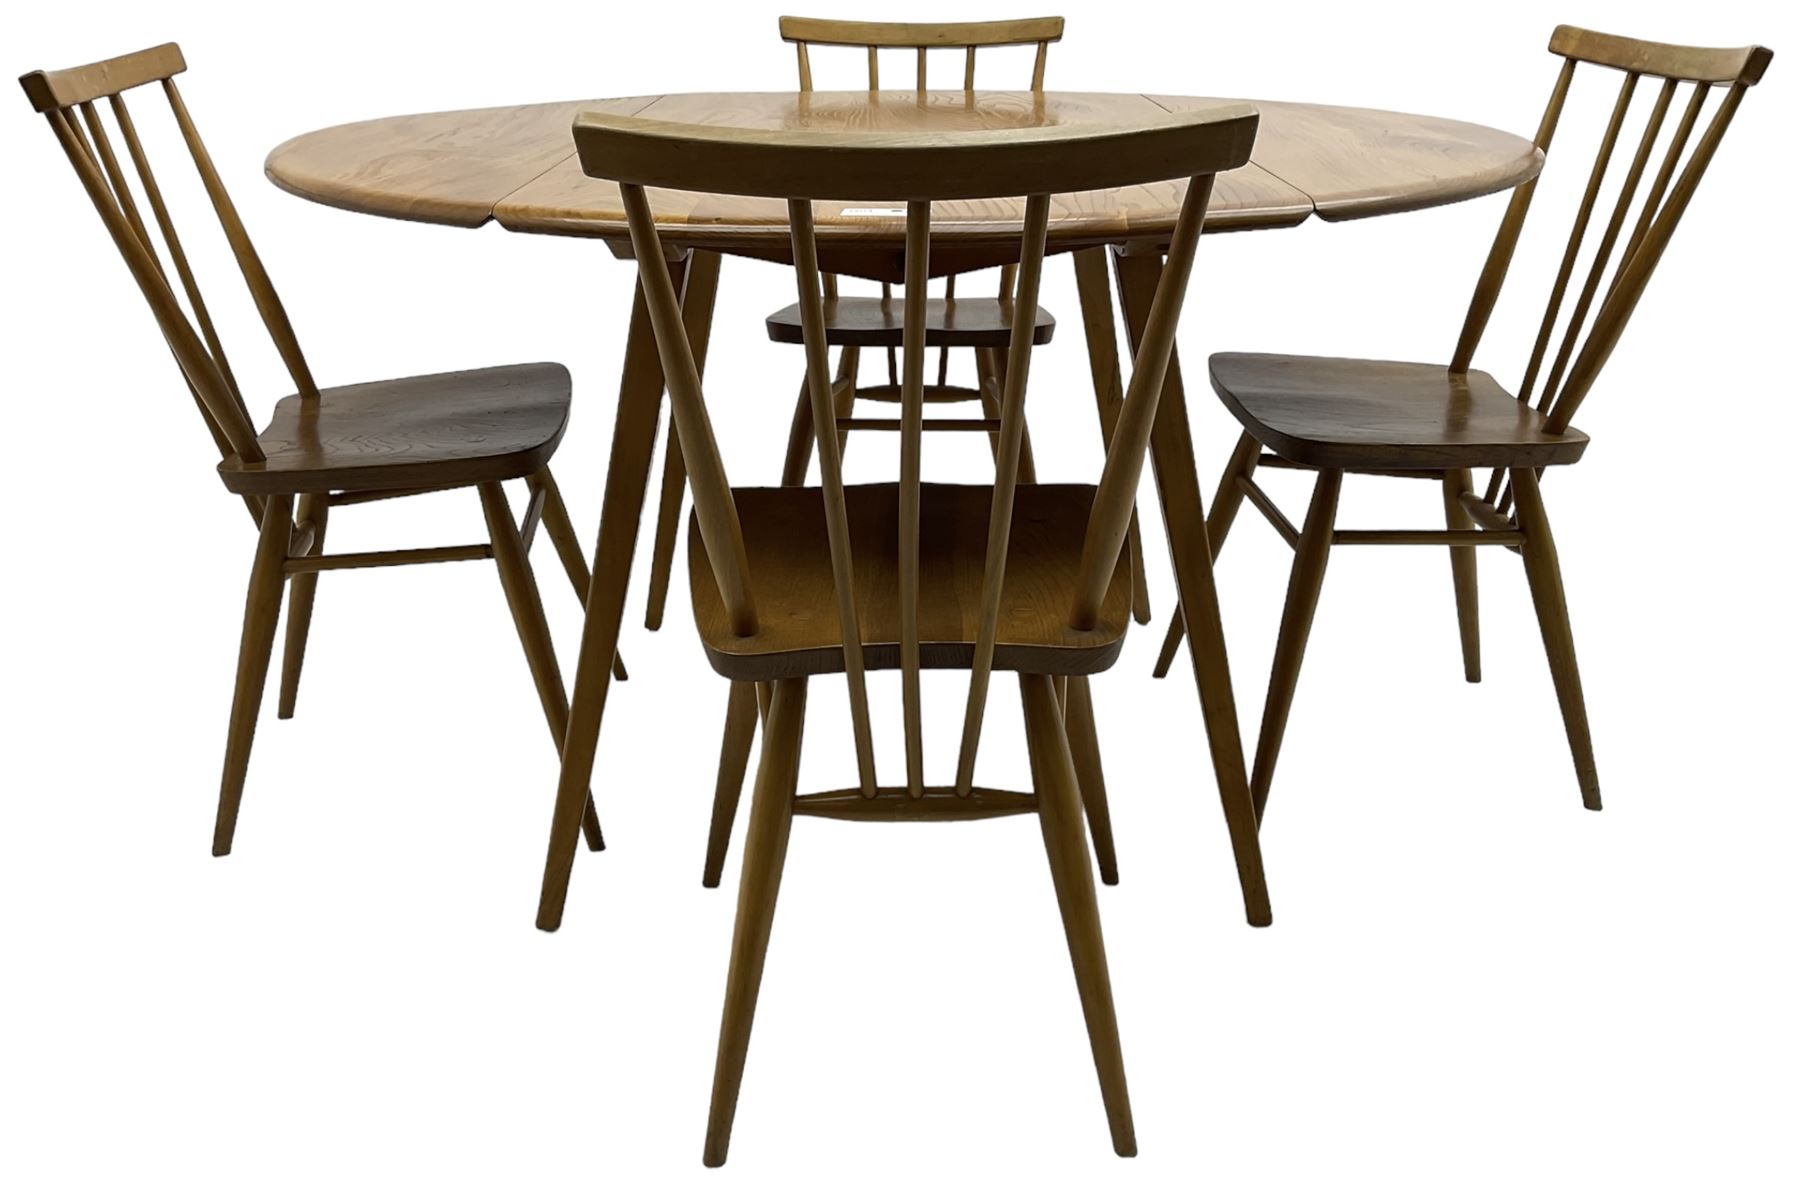 Ercol - elm and beech dining table - Image 5 of 6